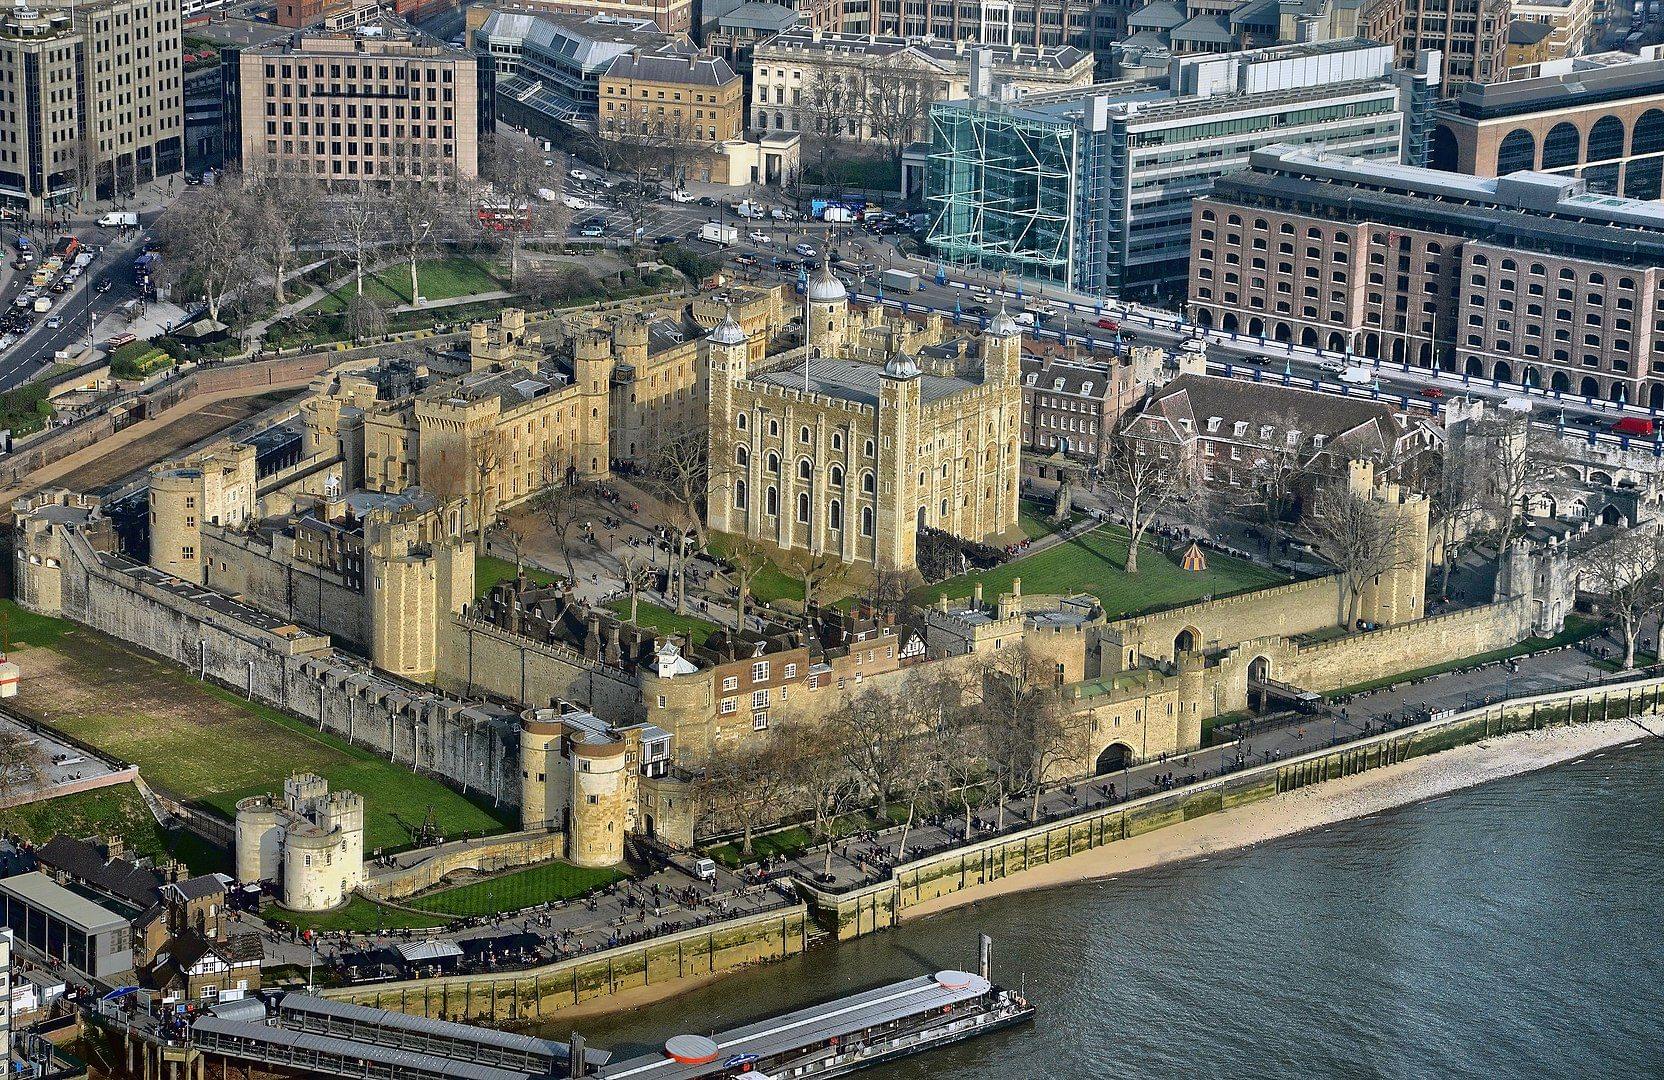 Visit The Tower Of London